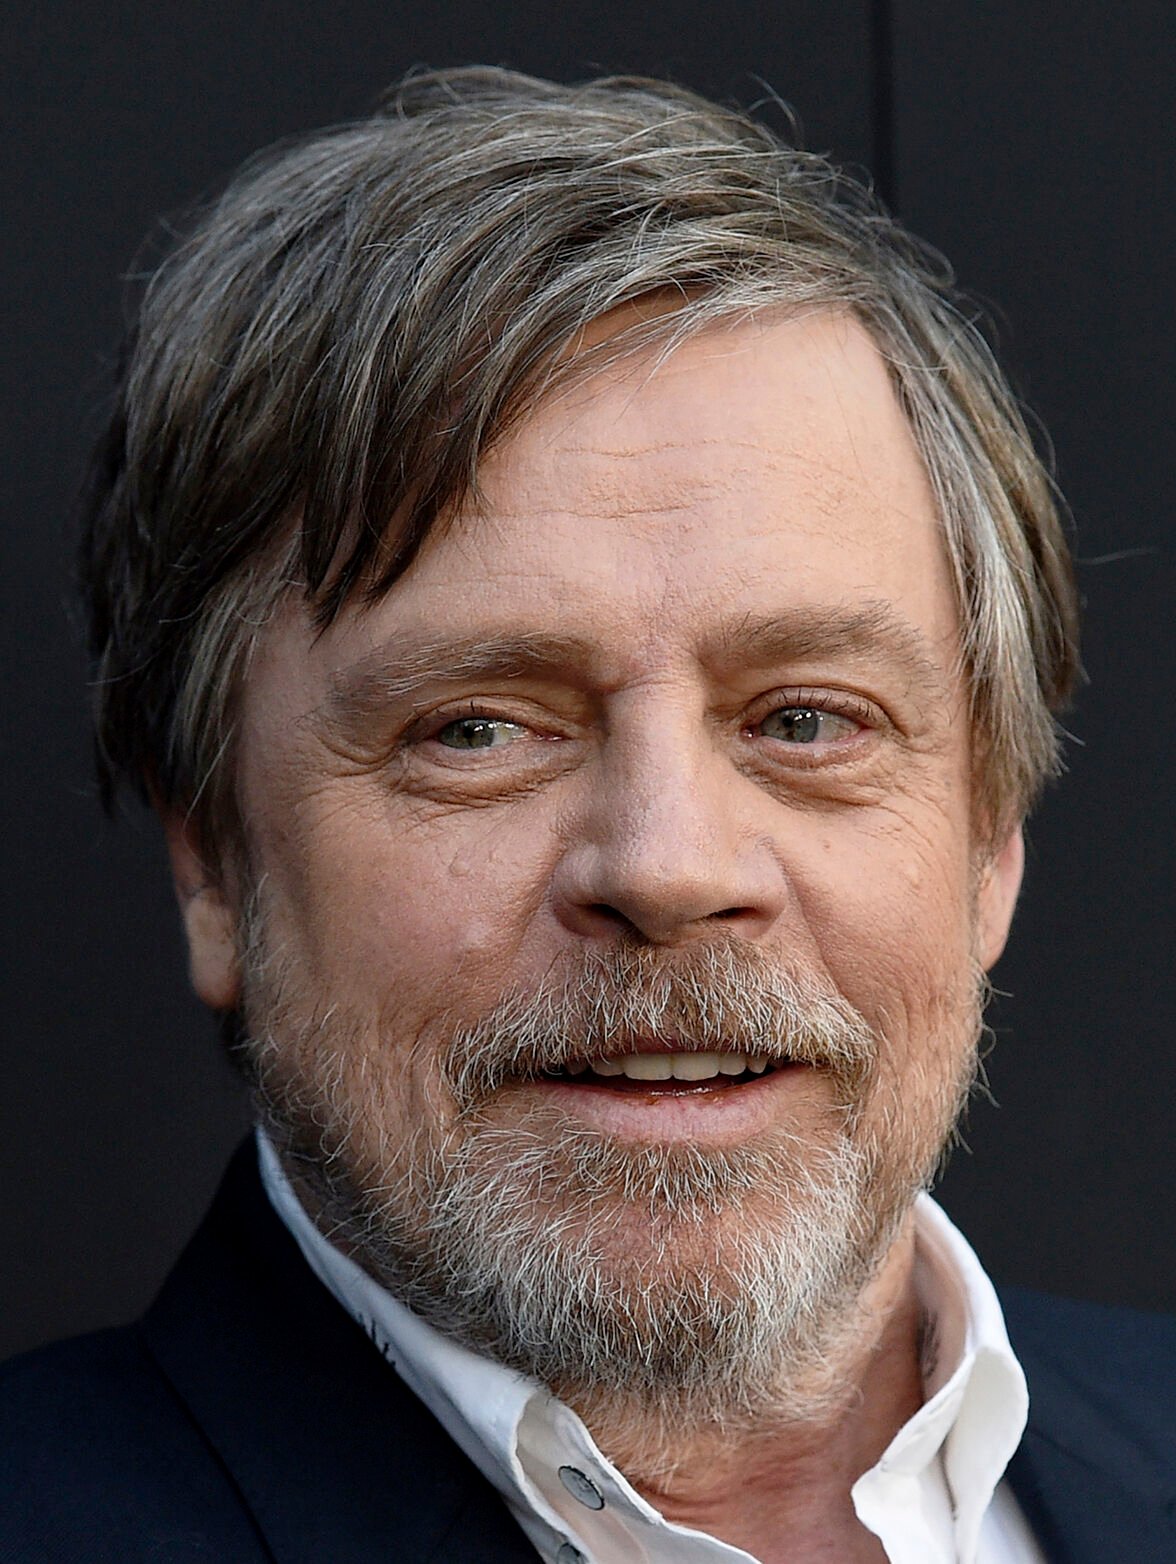 Mark Hamill on Why Star Wars Came Up During Volodymyr Zelenskyy Talk